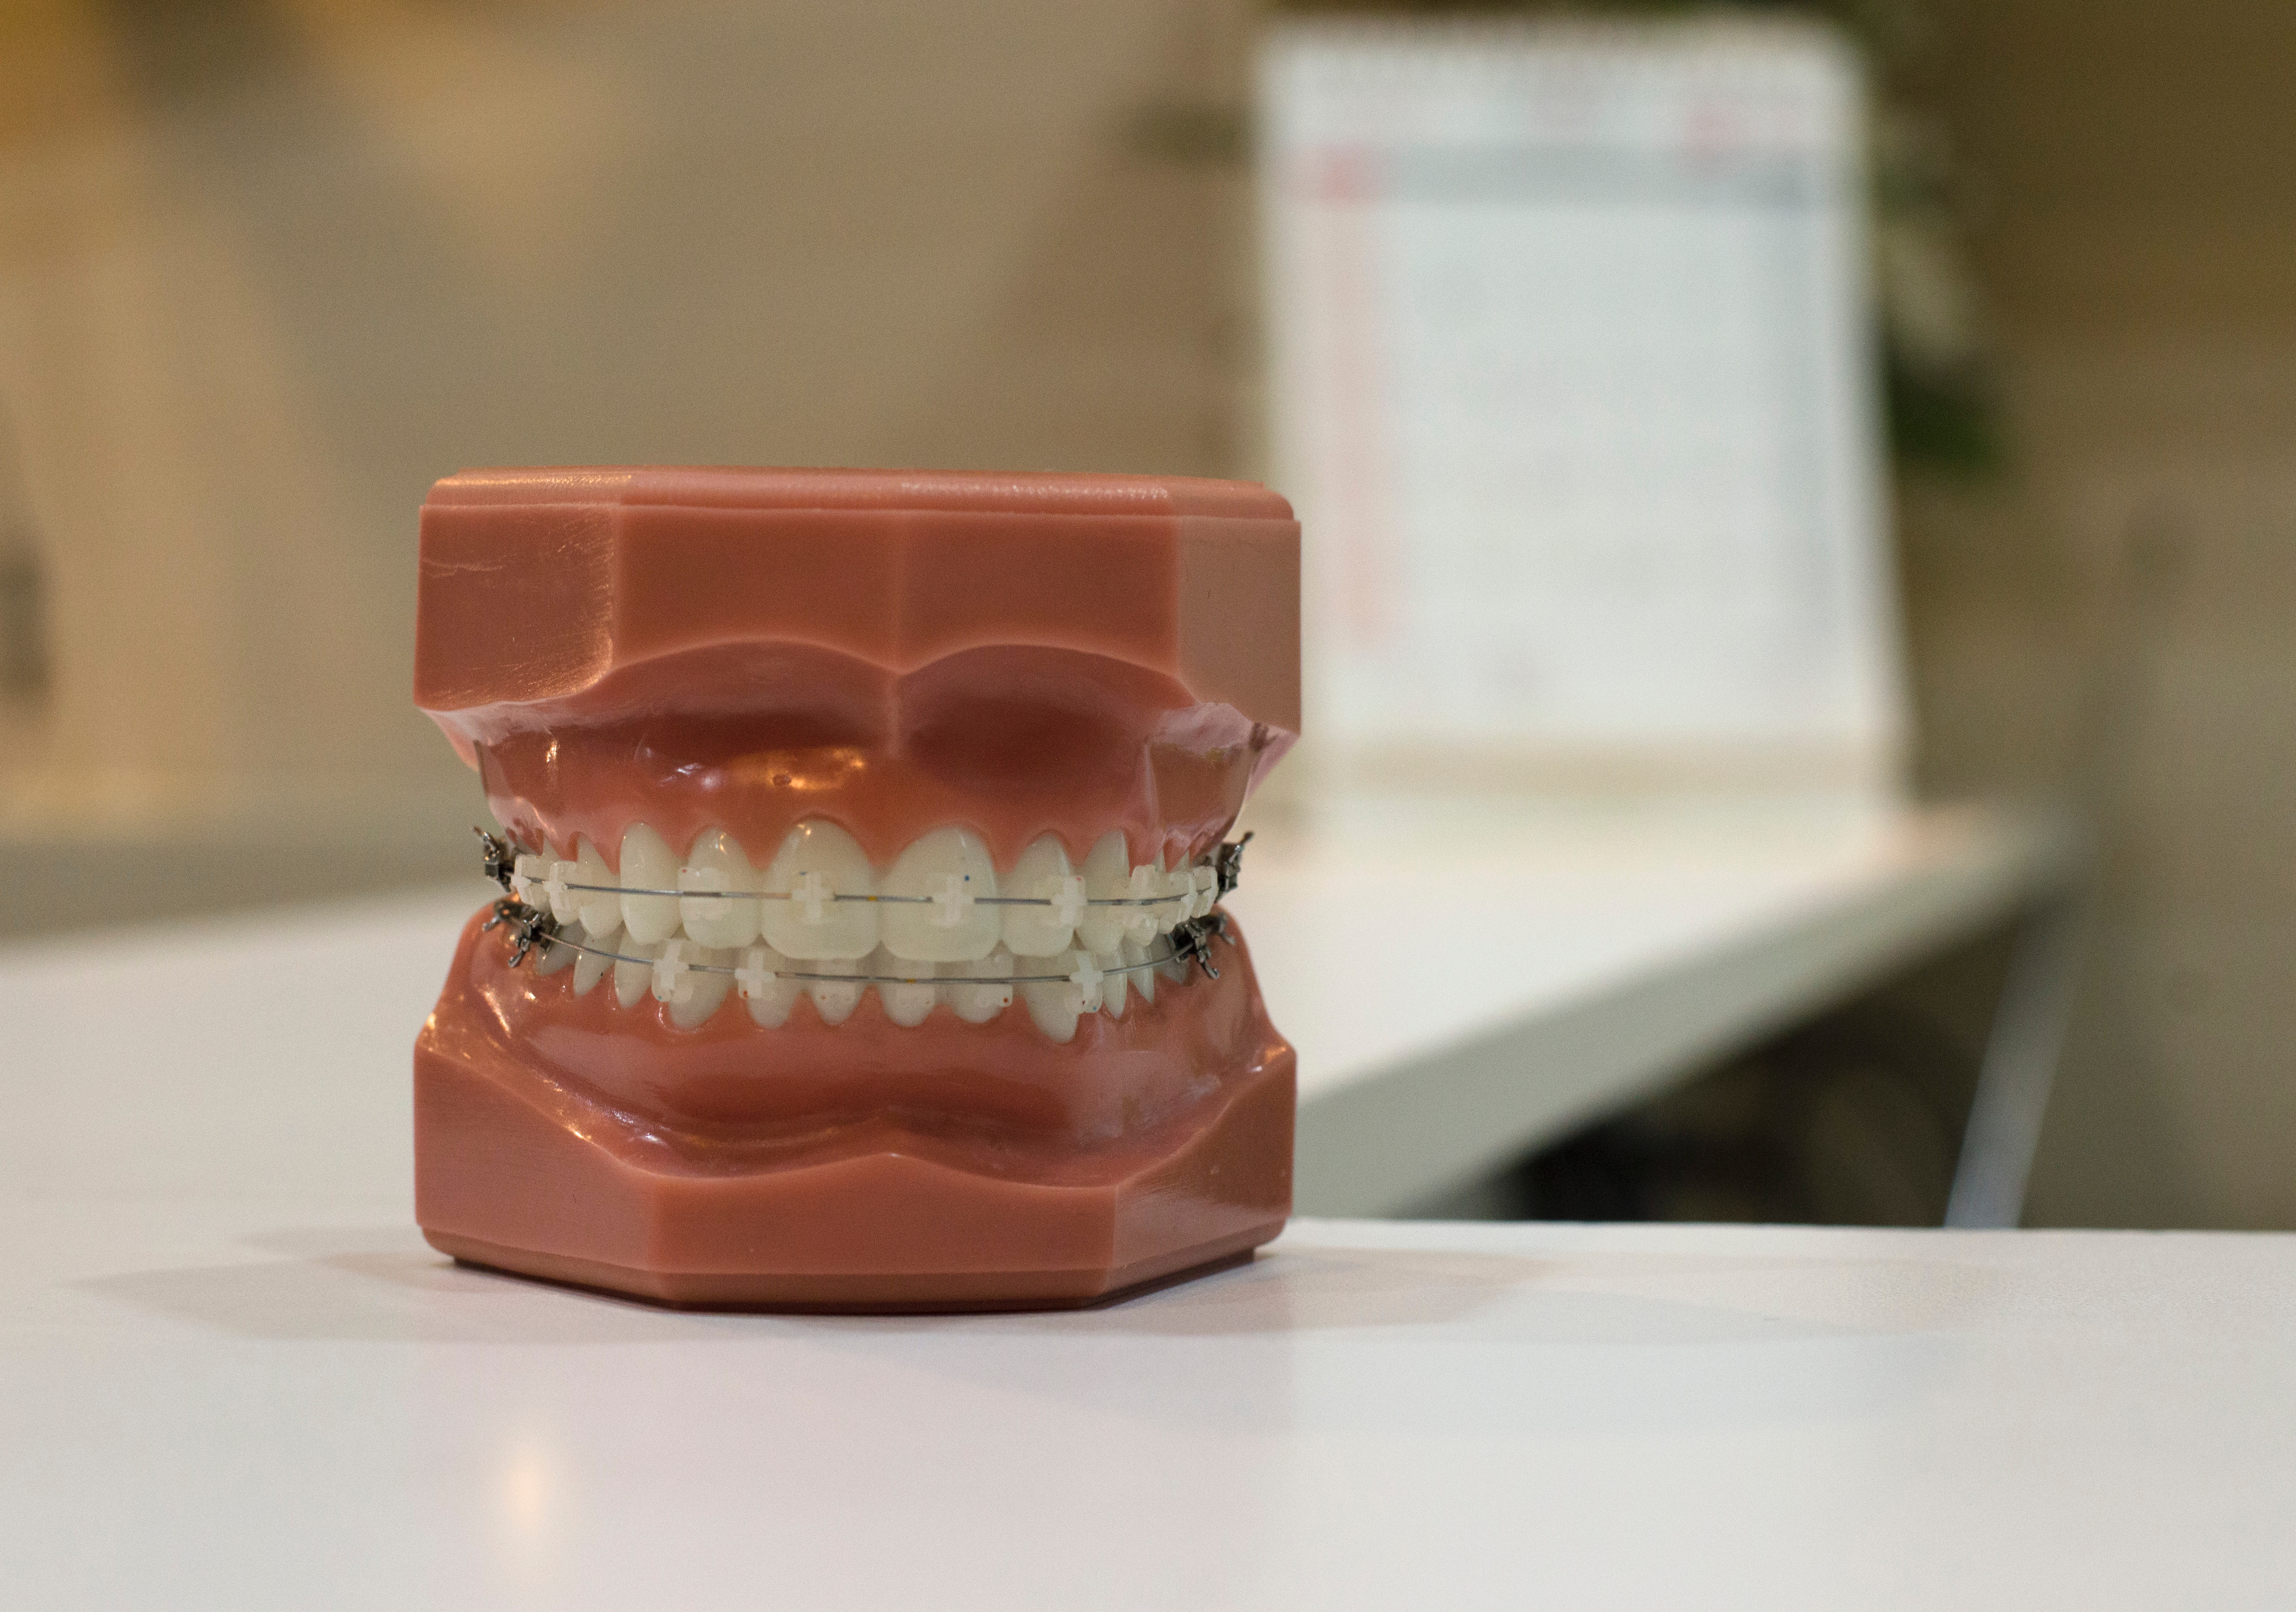 5 Reasons Anxious Patients Don’t Book a Dentist